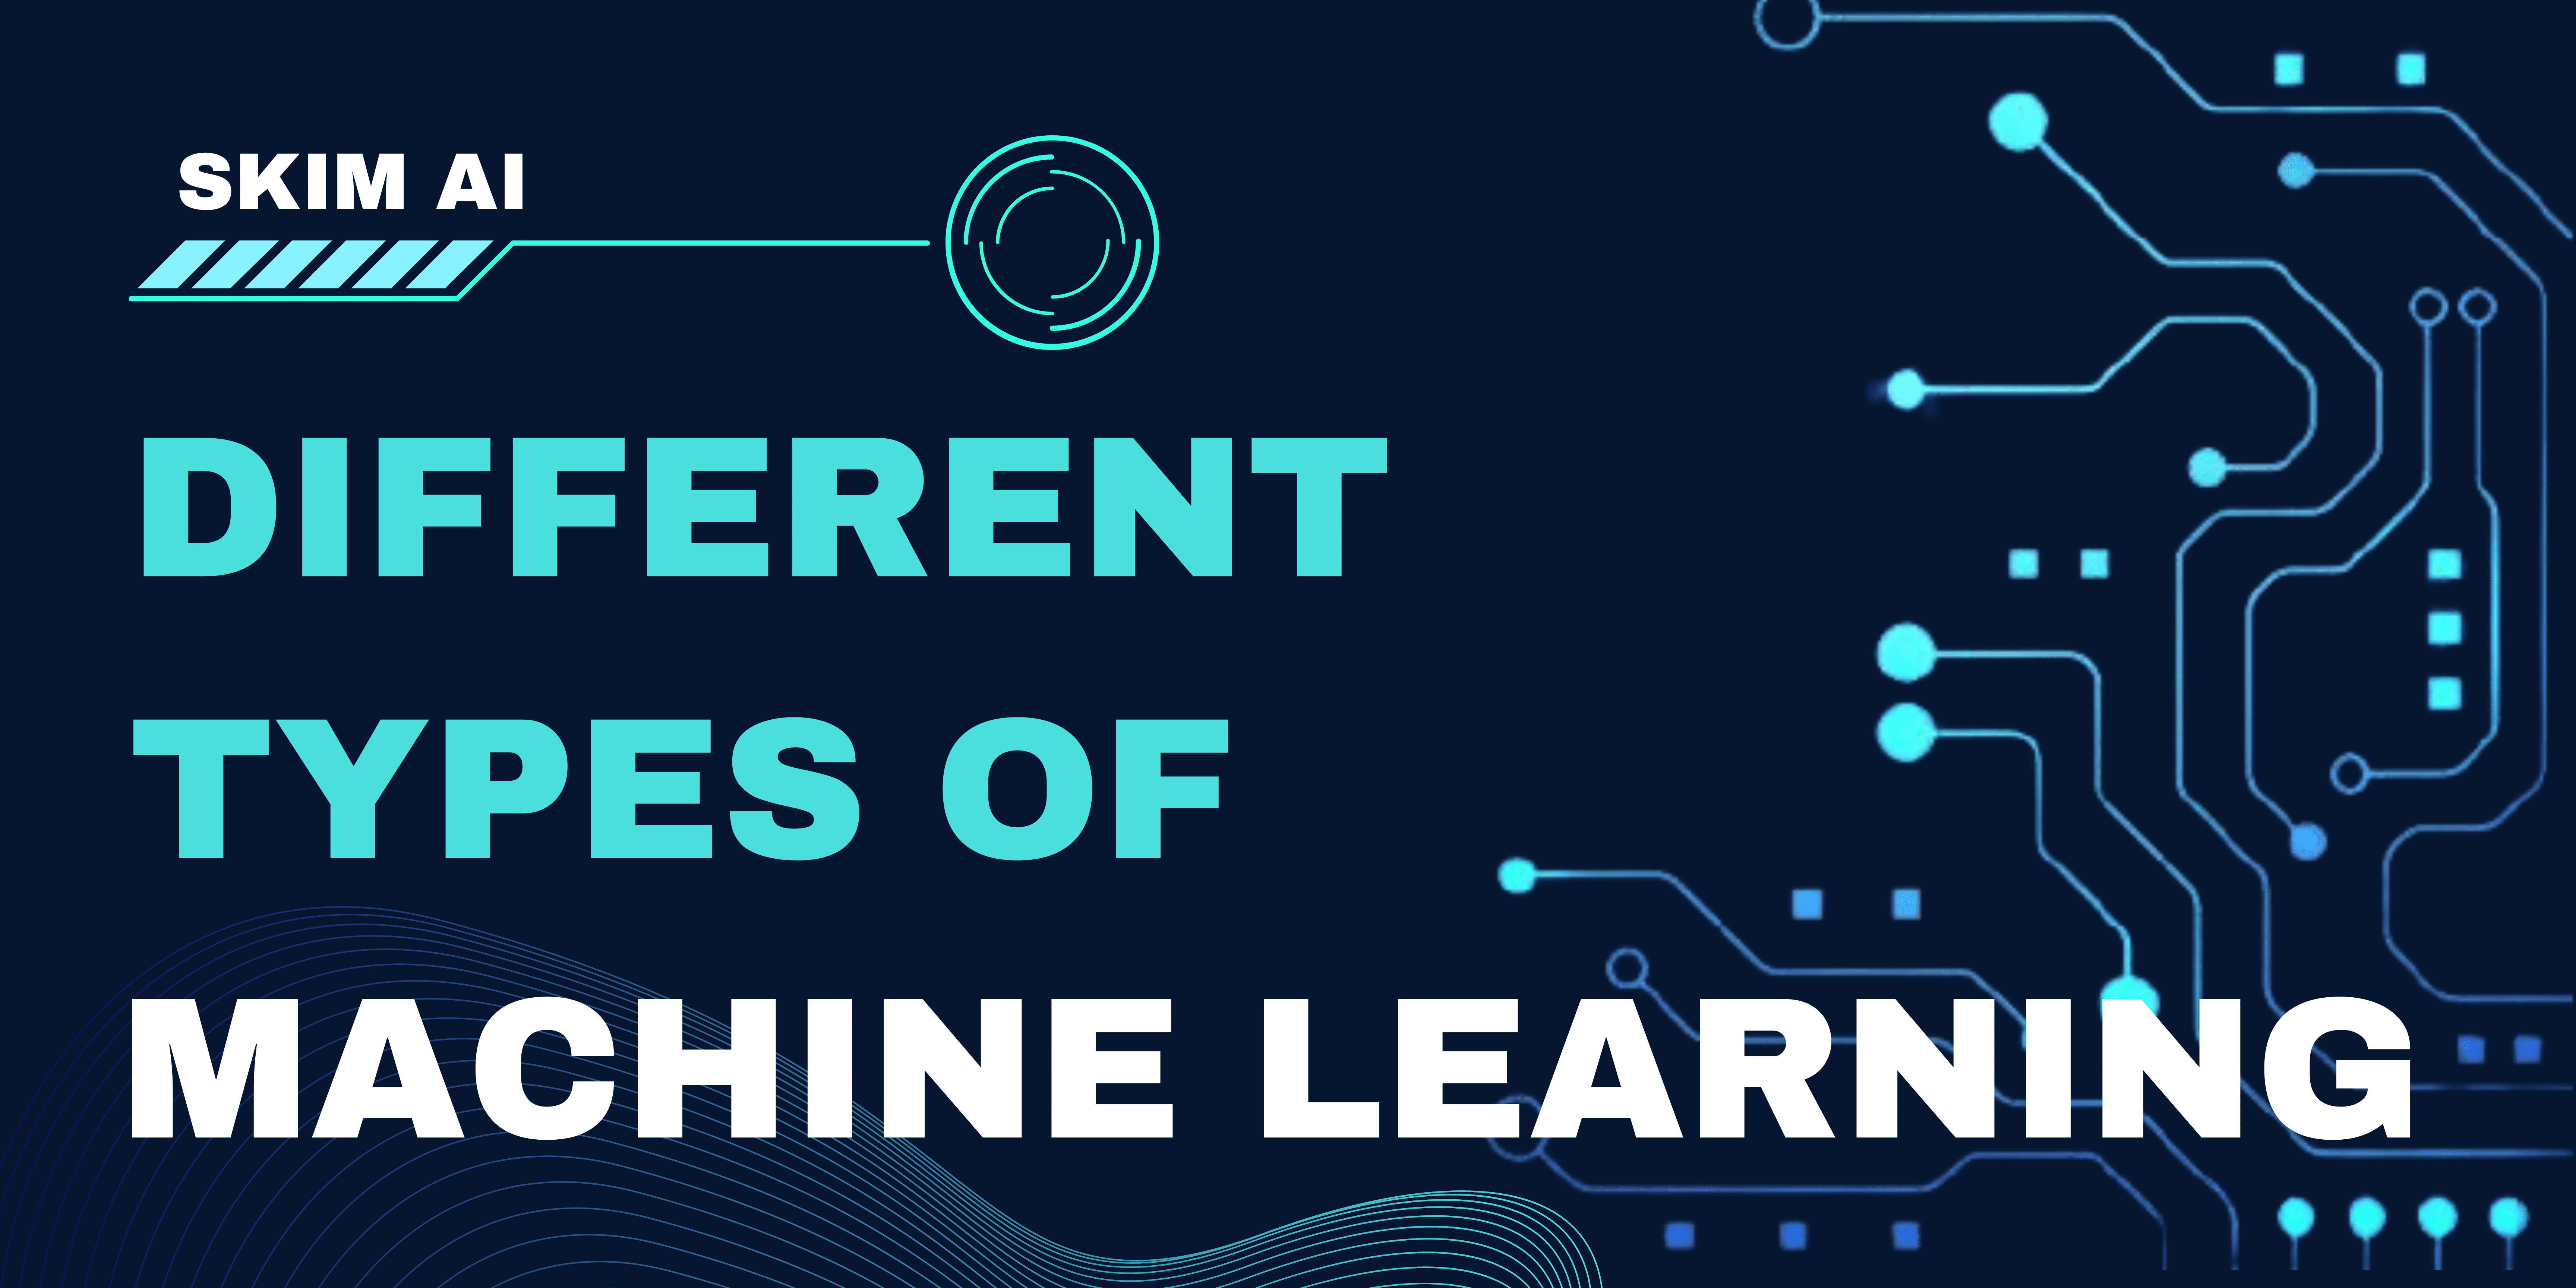 Different Types of Machine Learning